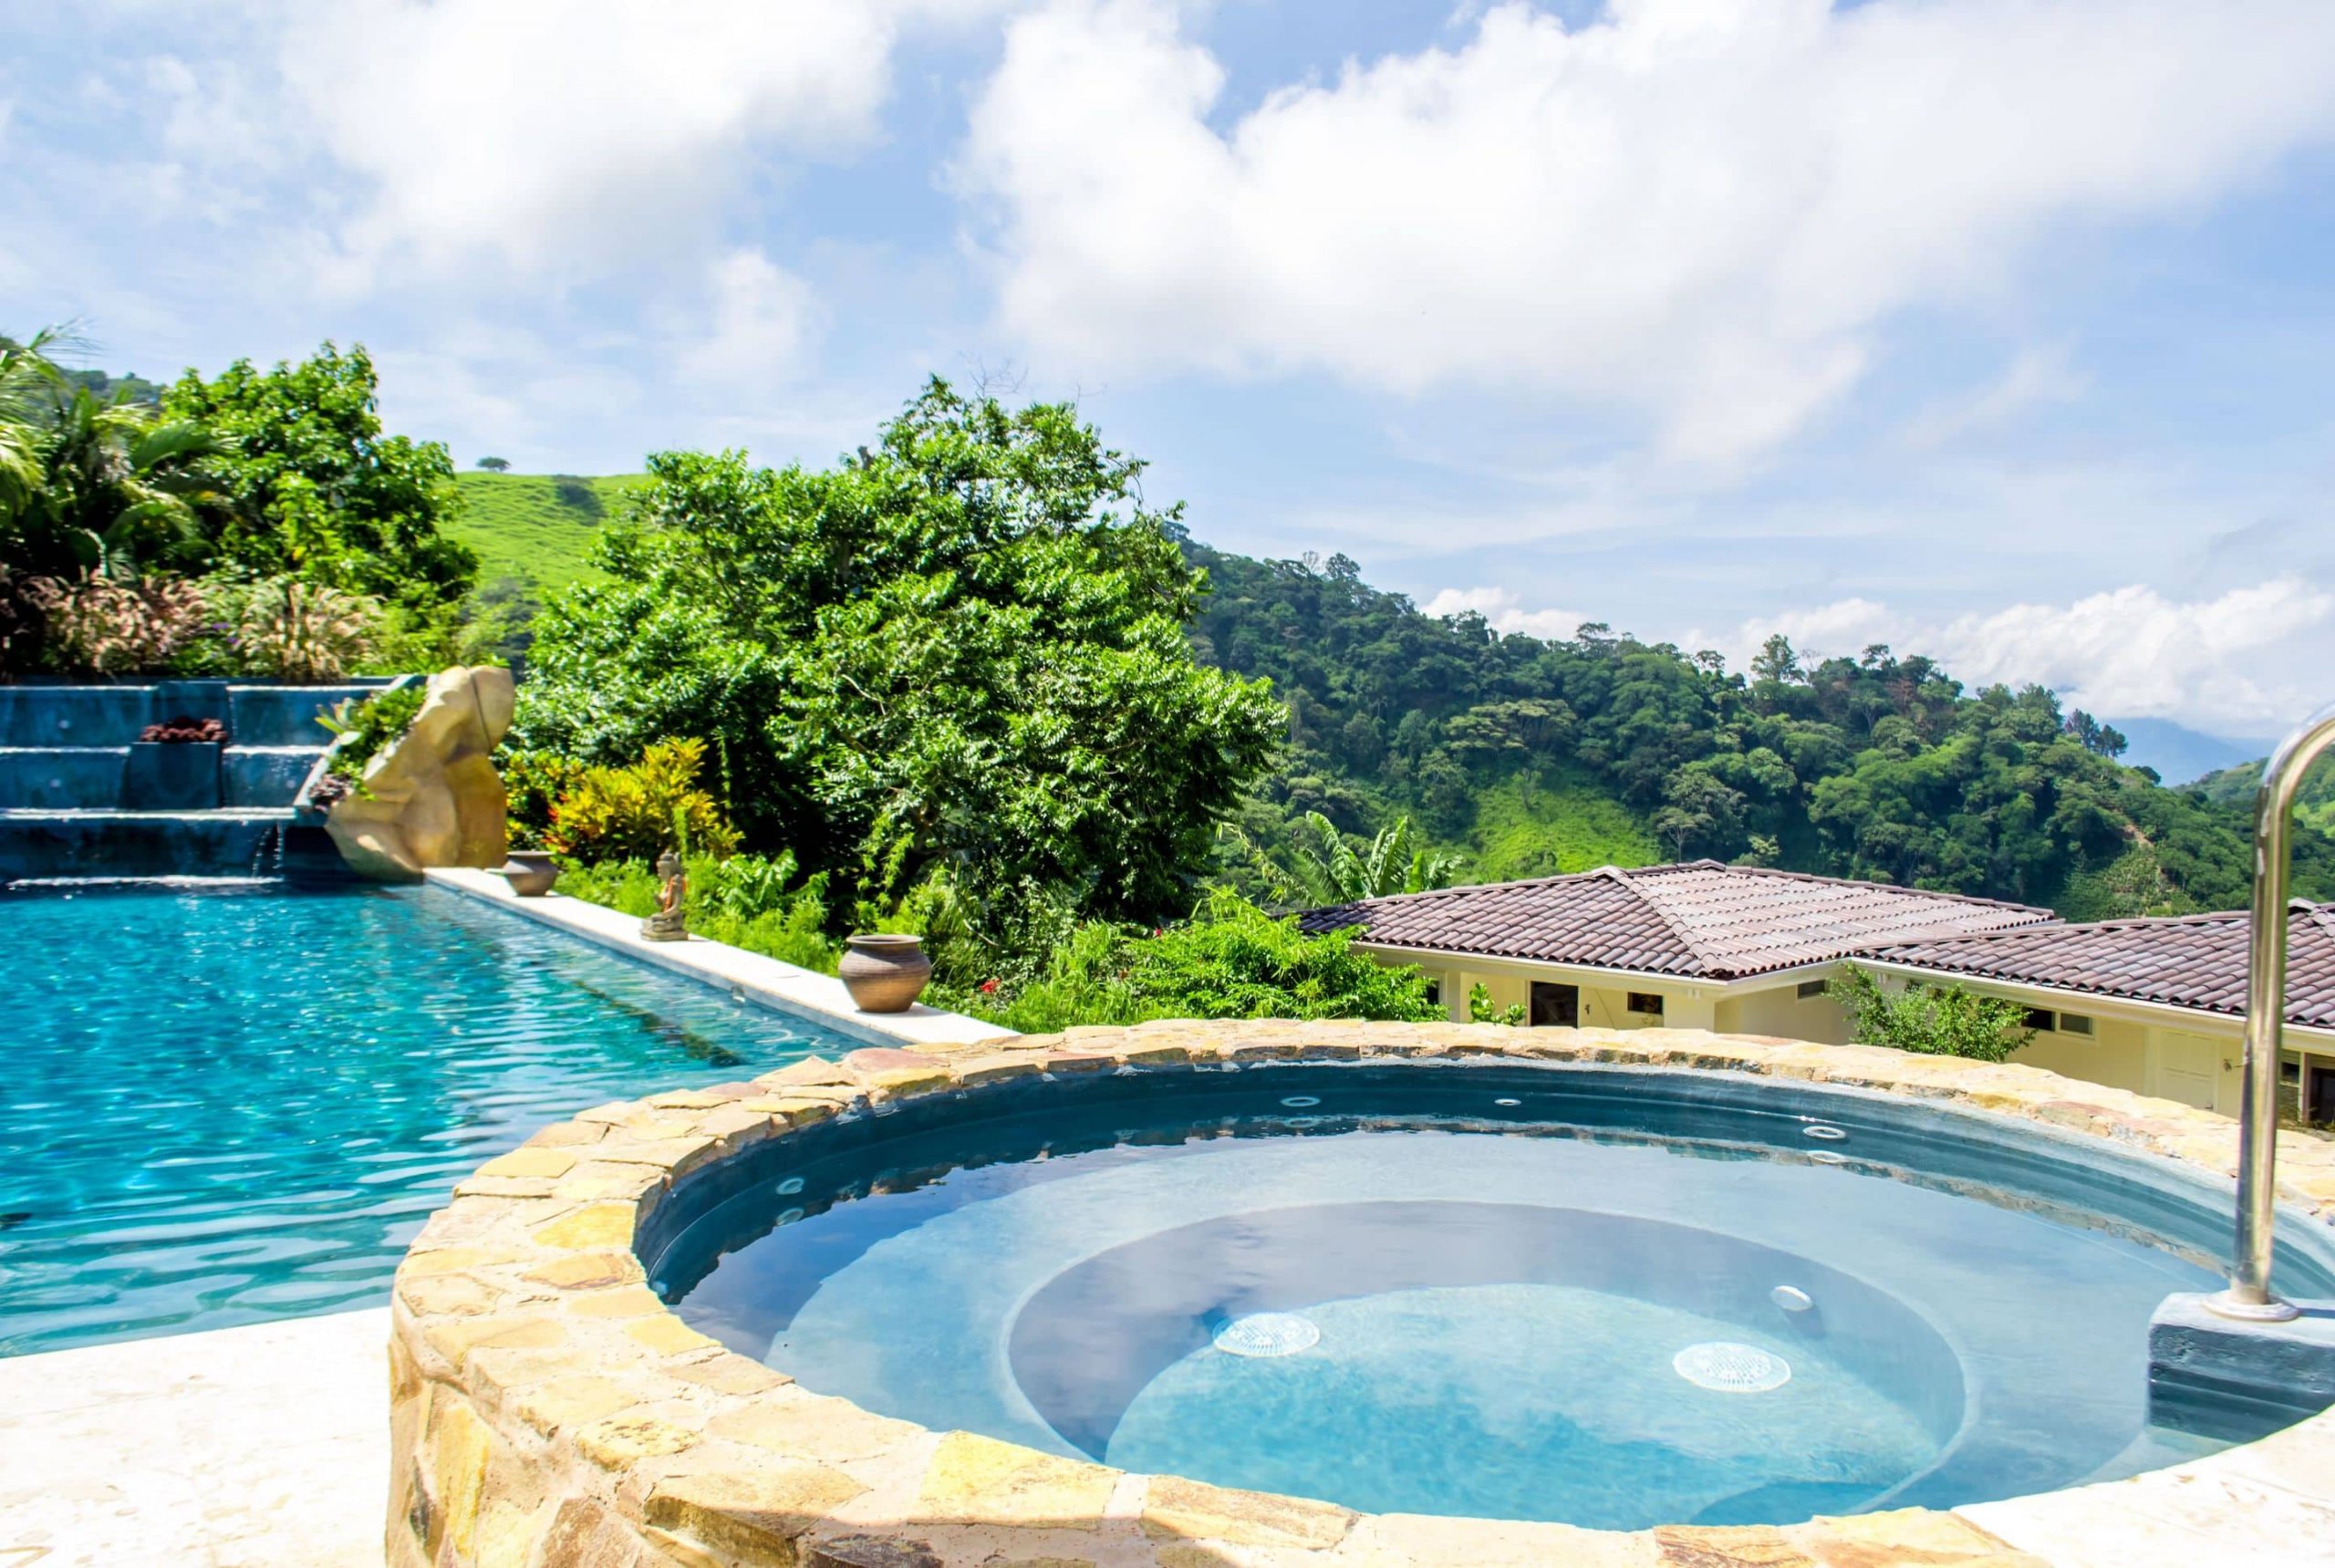 The hot tub at The Retreat in Costa Rica overlooks the jungle and ocean views.